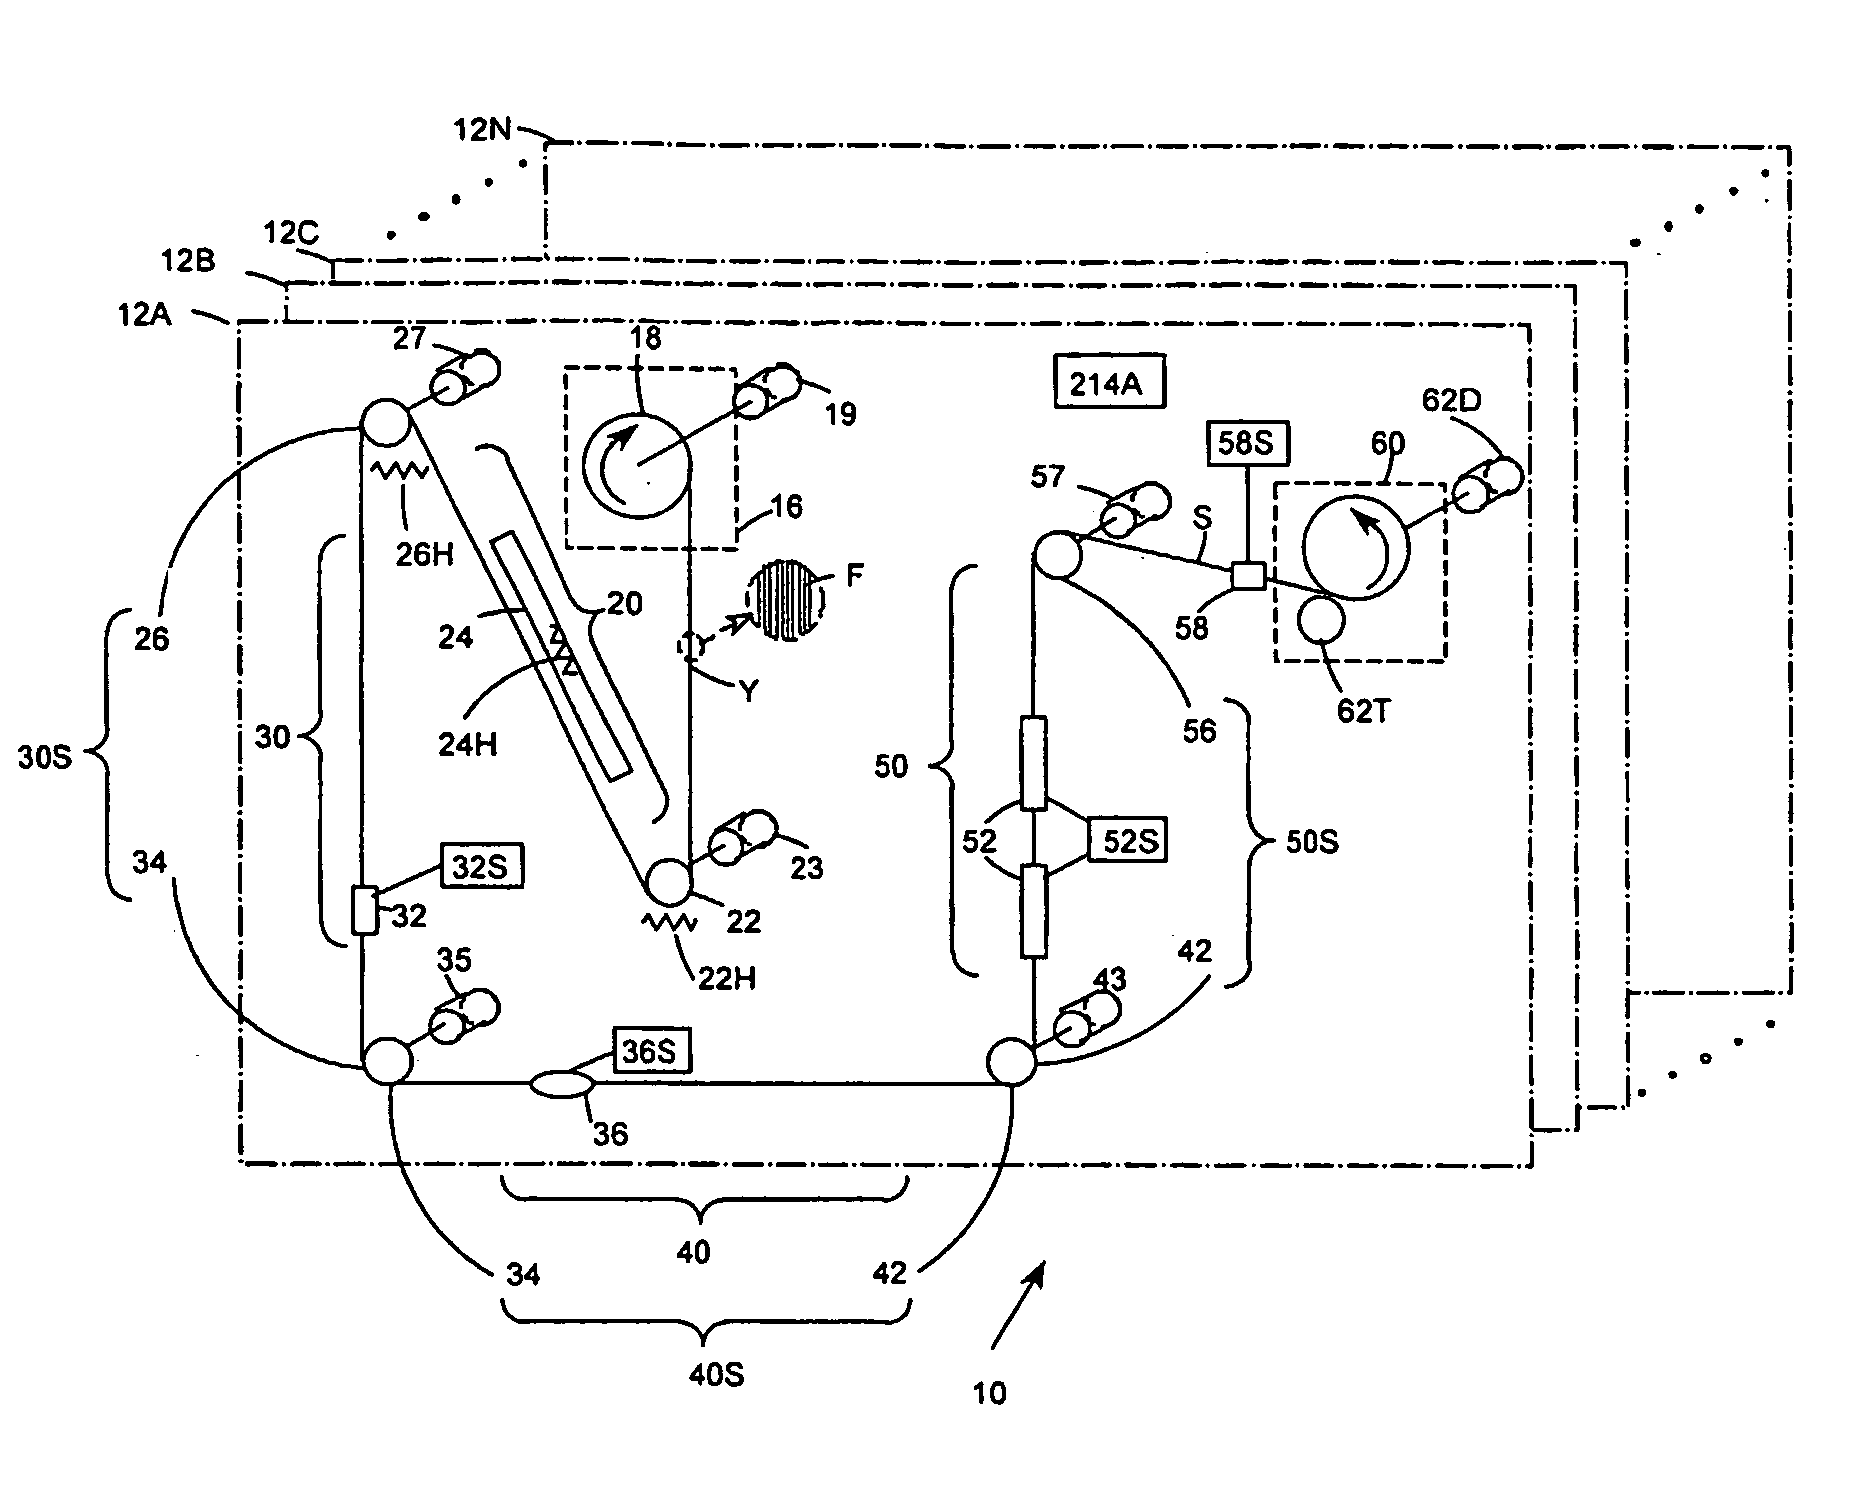 Method for control of yarn processing equipment